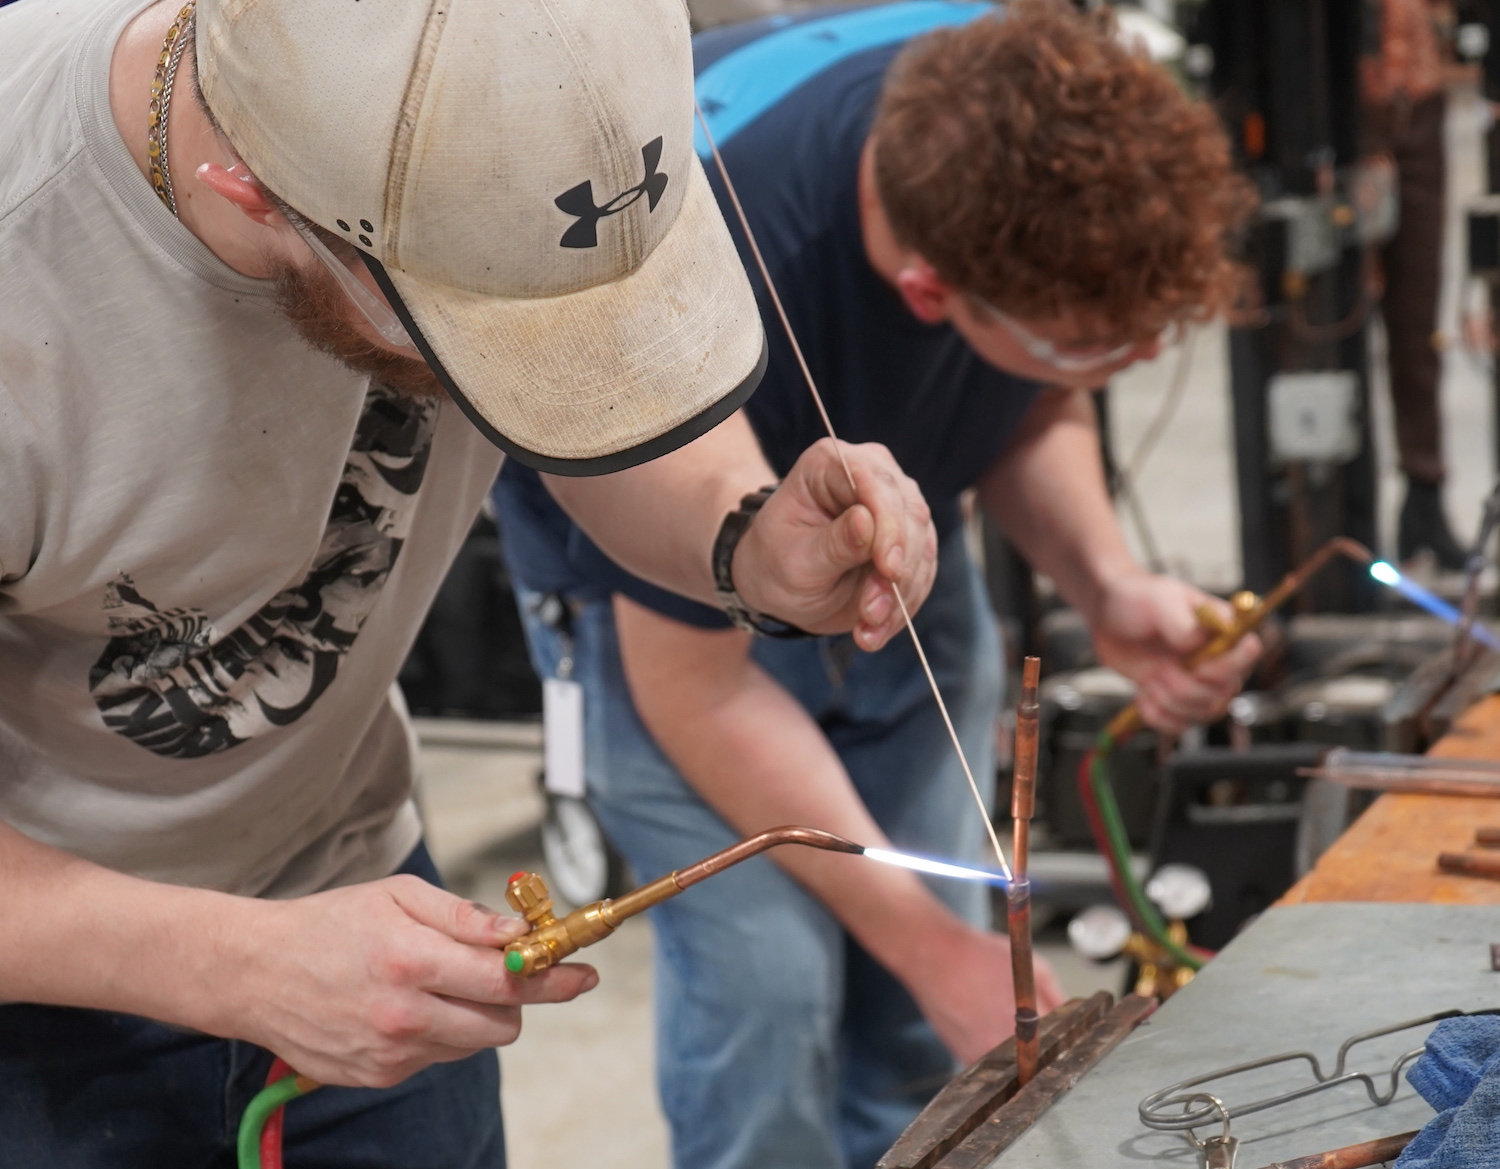 HVAC students heating up copper tubing for soldering